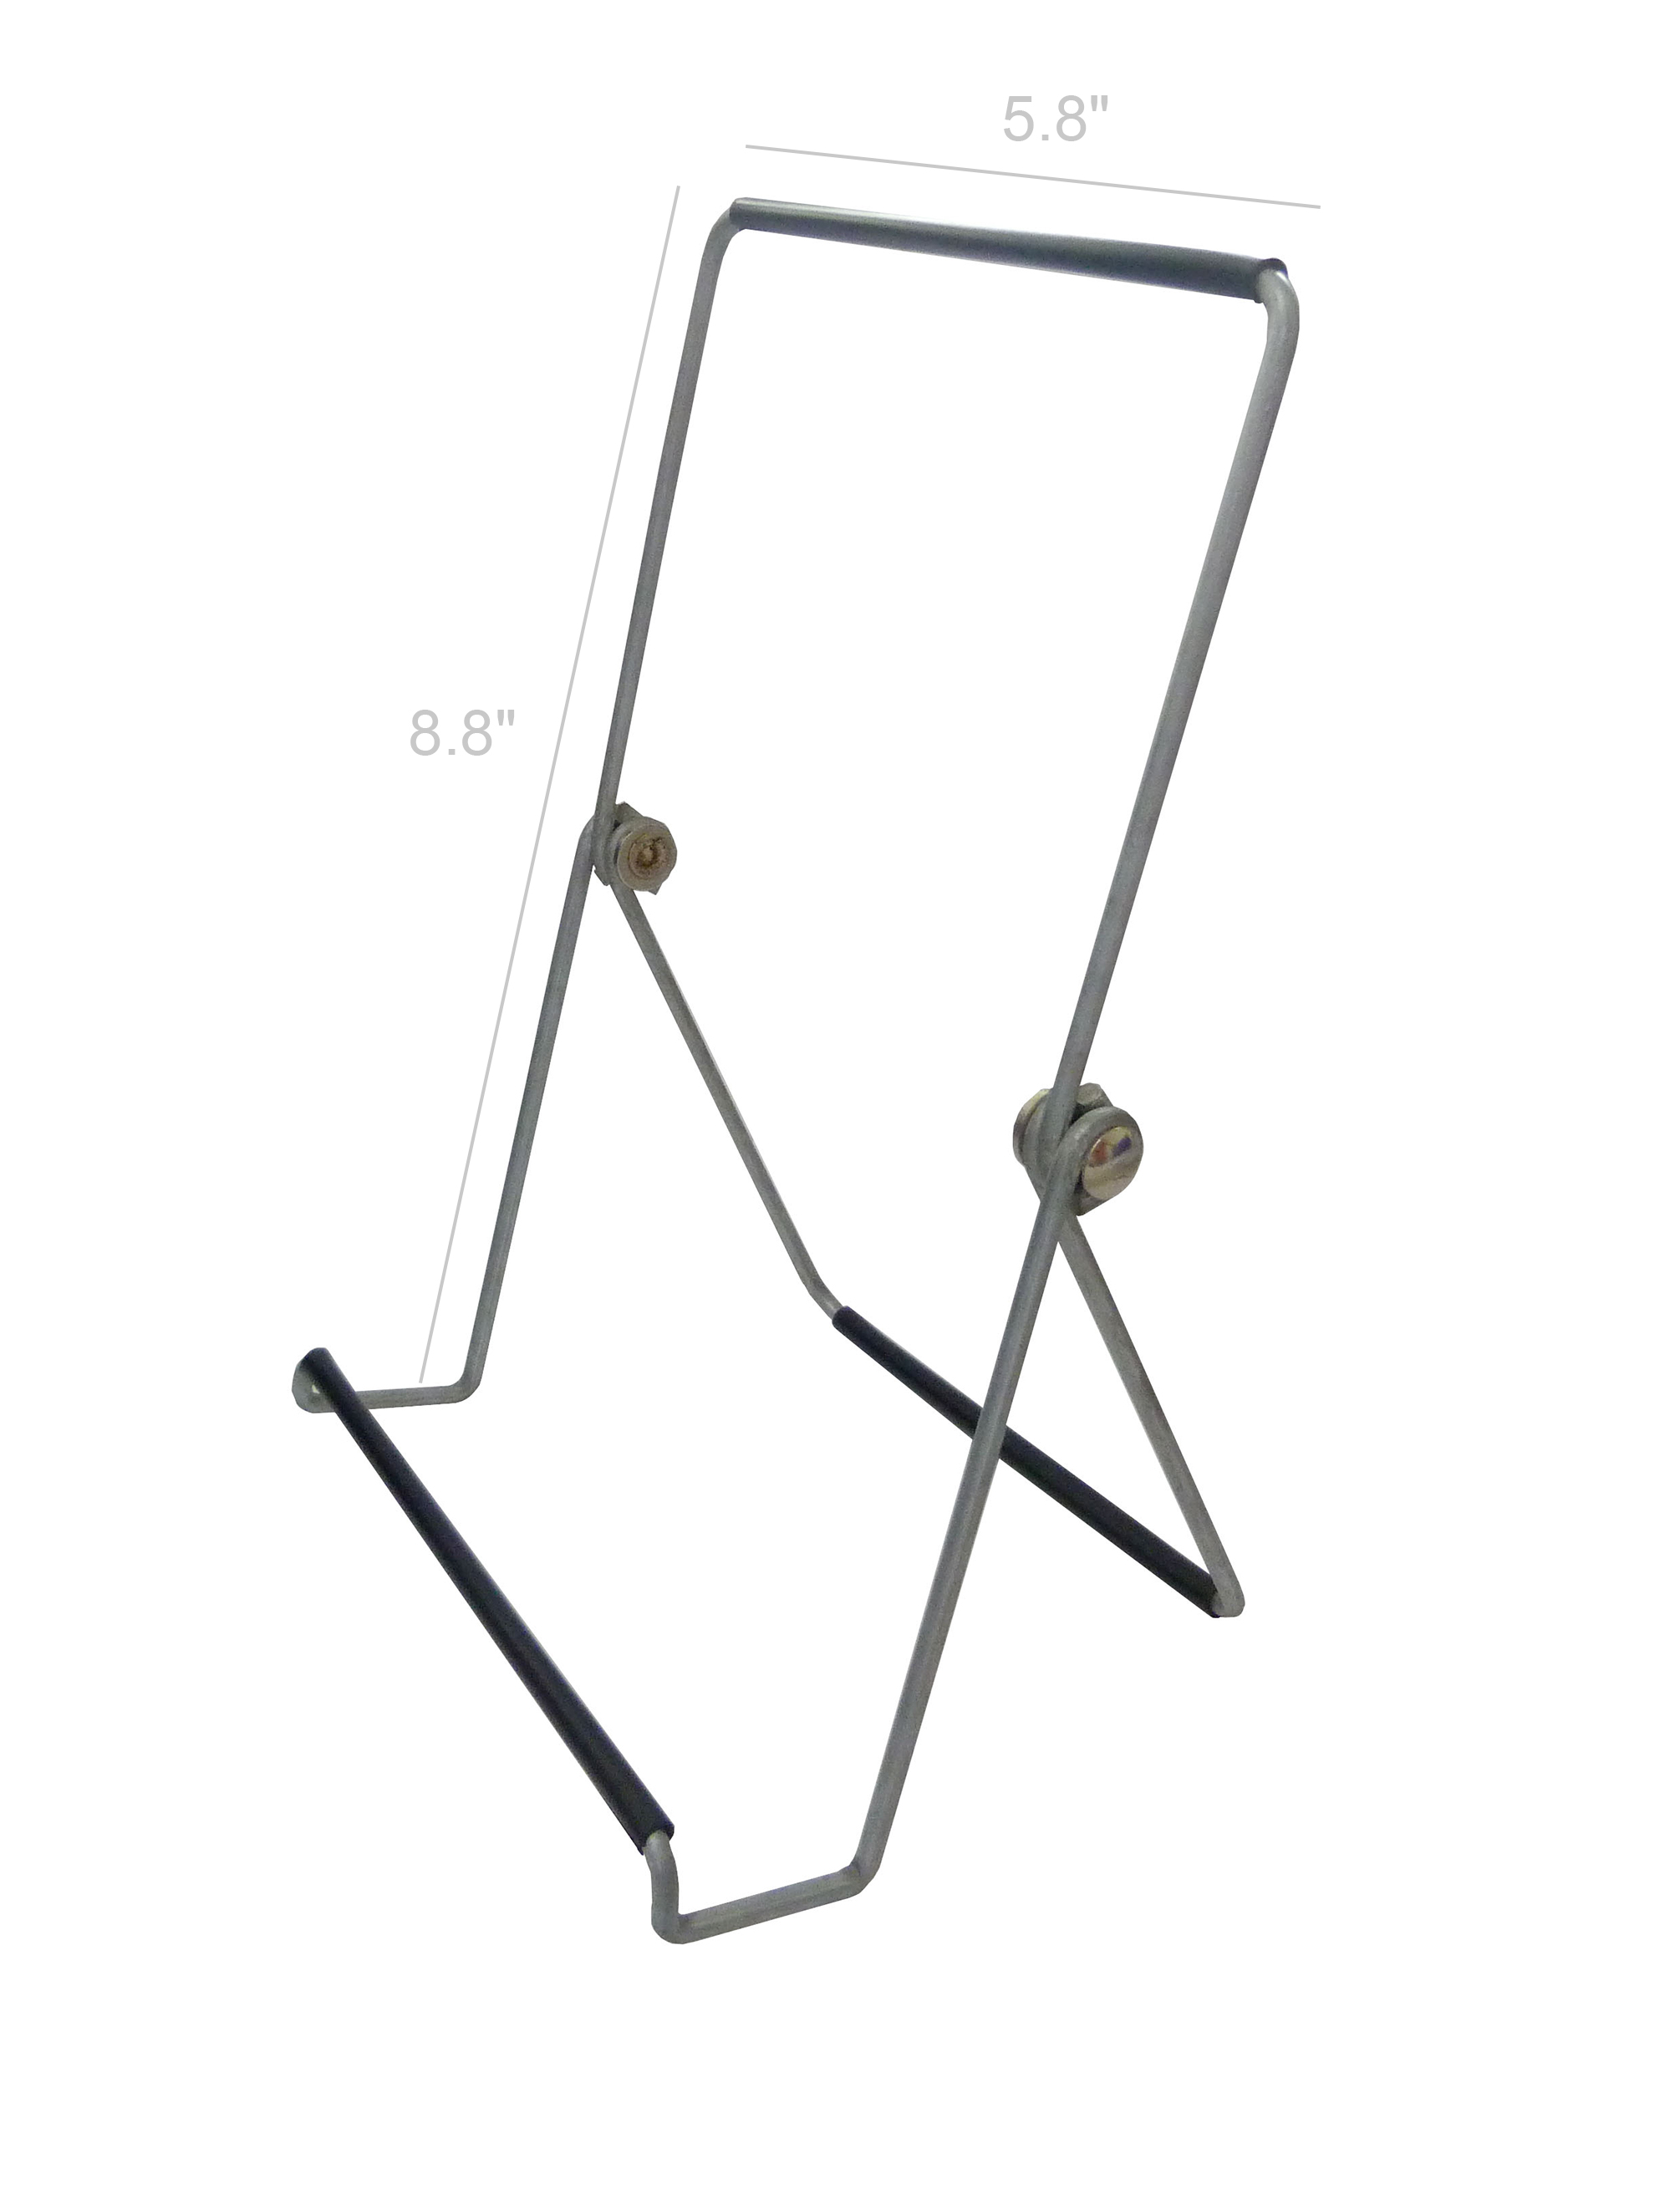 FixtureDisplays Wire Easel for Table Top with 1.2-inch Lip, Wide Base, 5-5/8 x 8-3/4, Foldable Design, for Books, Trophy Plaques, CDs